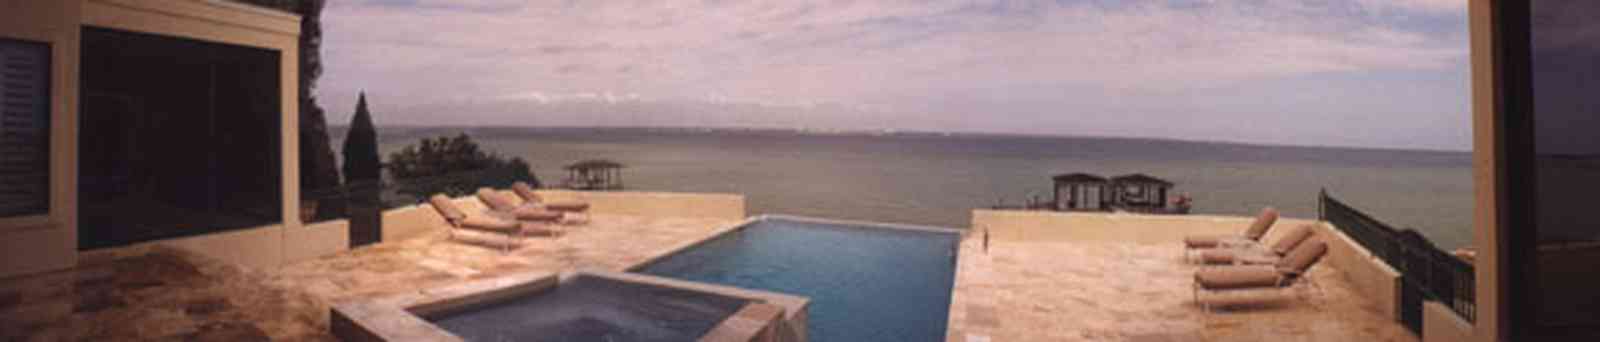 Gulf-Breeze:-Couch-Dreams_2.jpg:  old navy cove, gulf coast, gulf of mexico, pensacola bay, swimming pool, marble deck